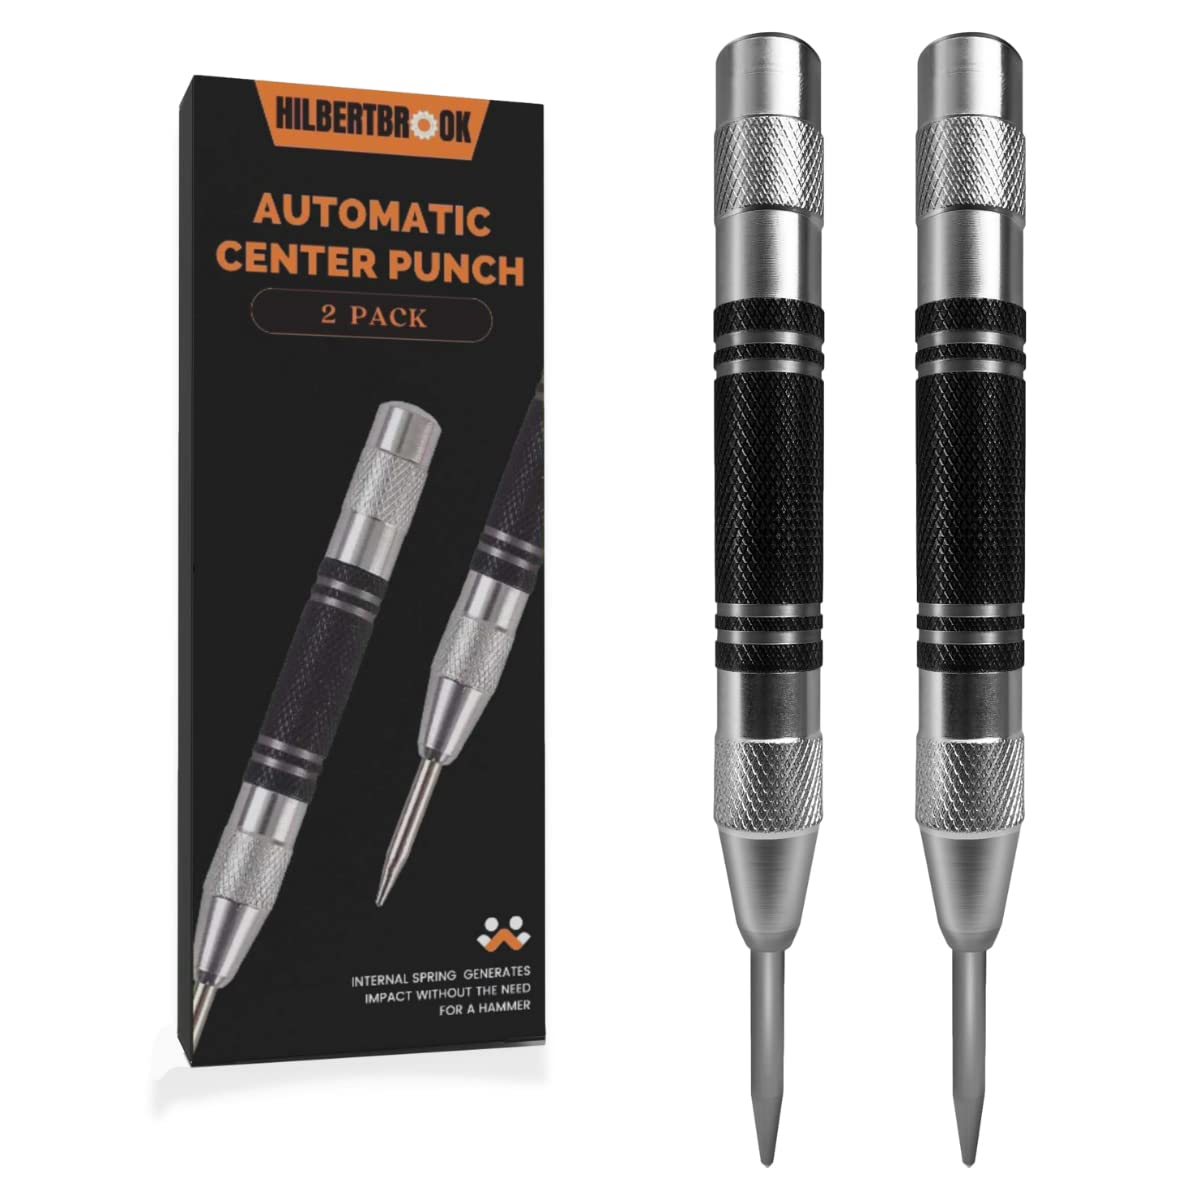 Hilbertbrook Automatic Center Punch 5 Inch Spring Loaded Center Punch Adjustable Tension Punch Tool For Metal Wood Glass Plastic(2 Pack)